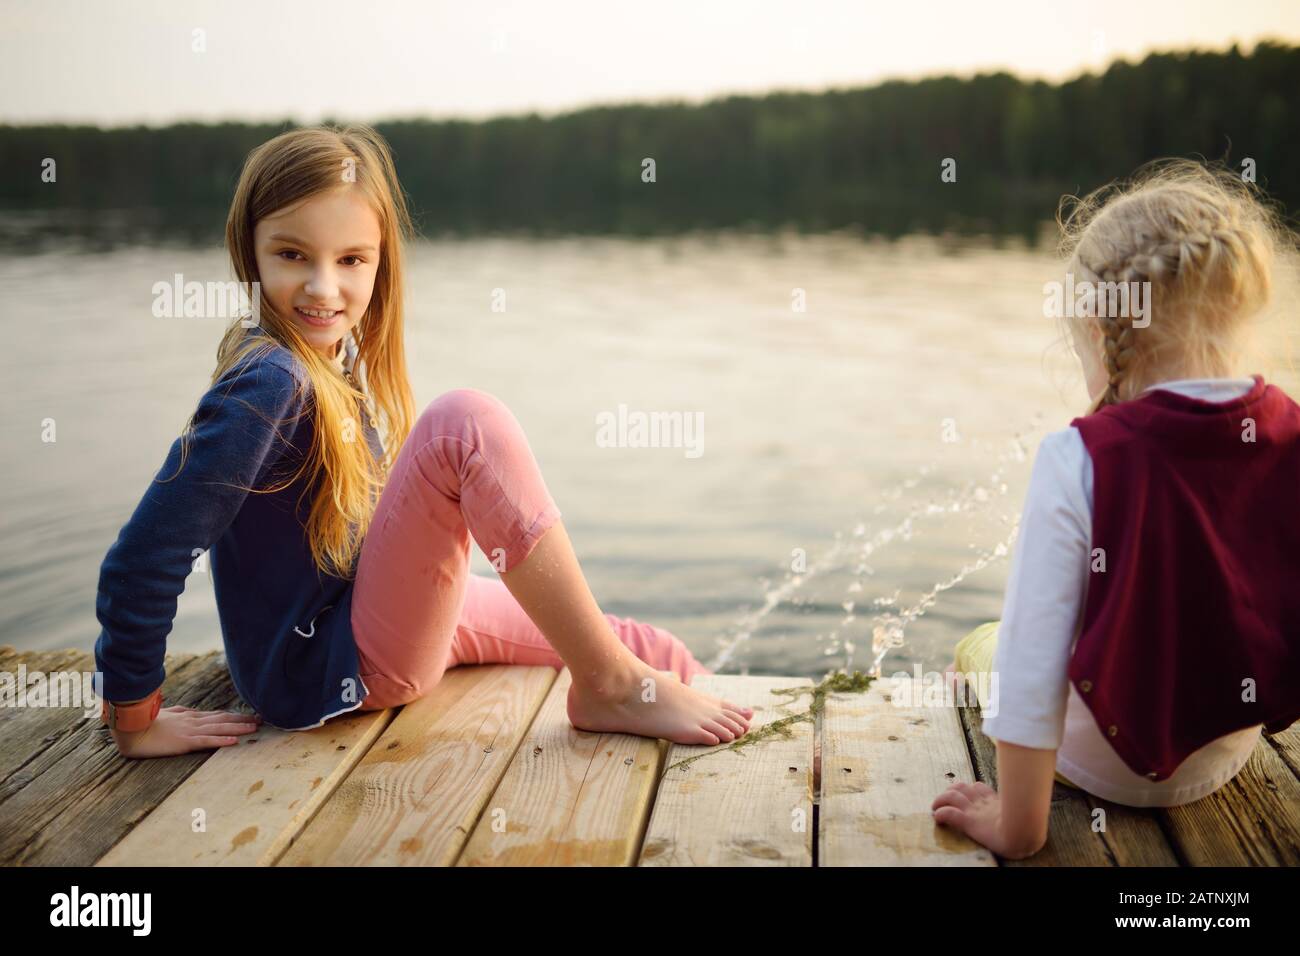 Two cute little girls sitting on a wooden platform by the river or lake dipping their feet in the water on warm summer day. Family activities in summe Stock Photo